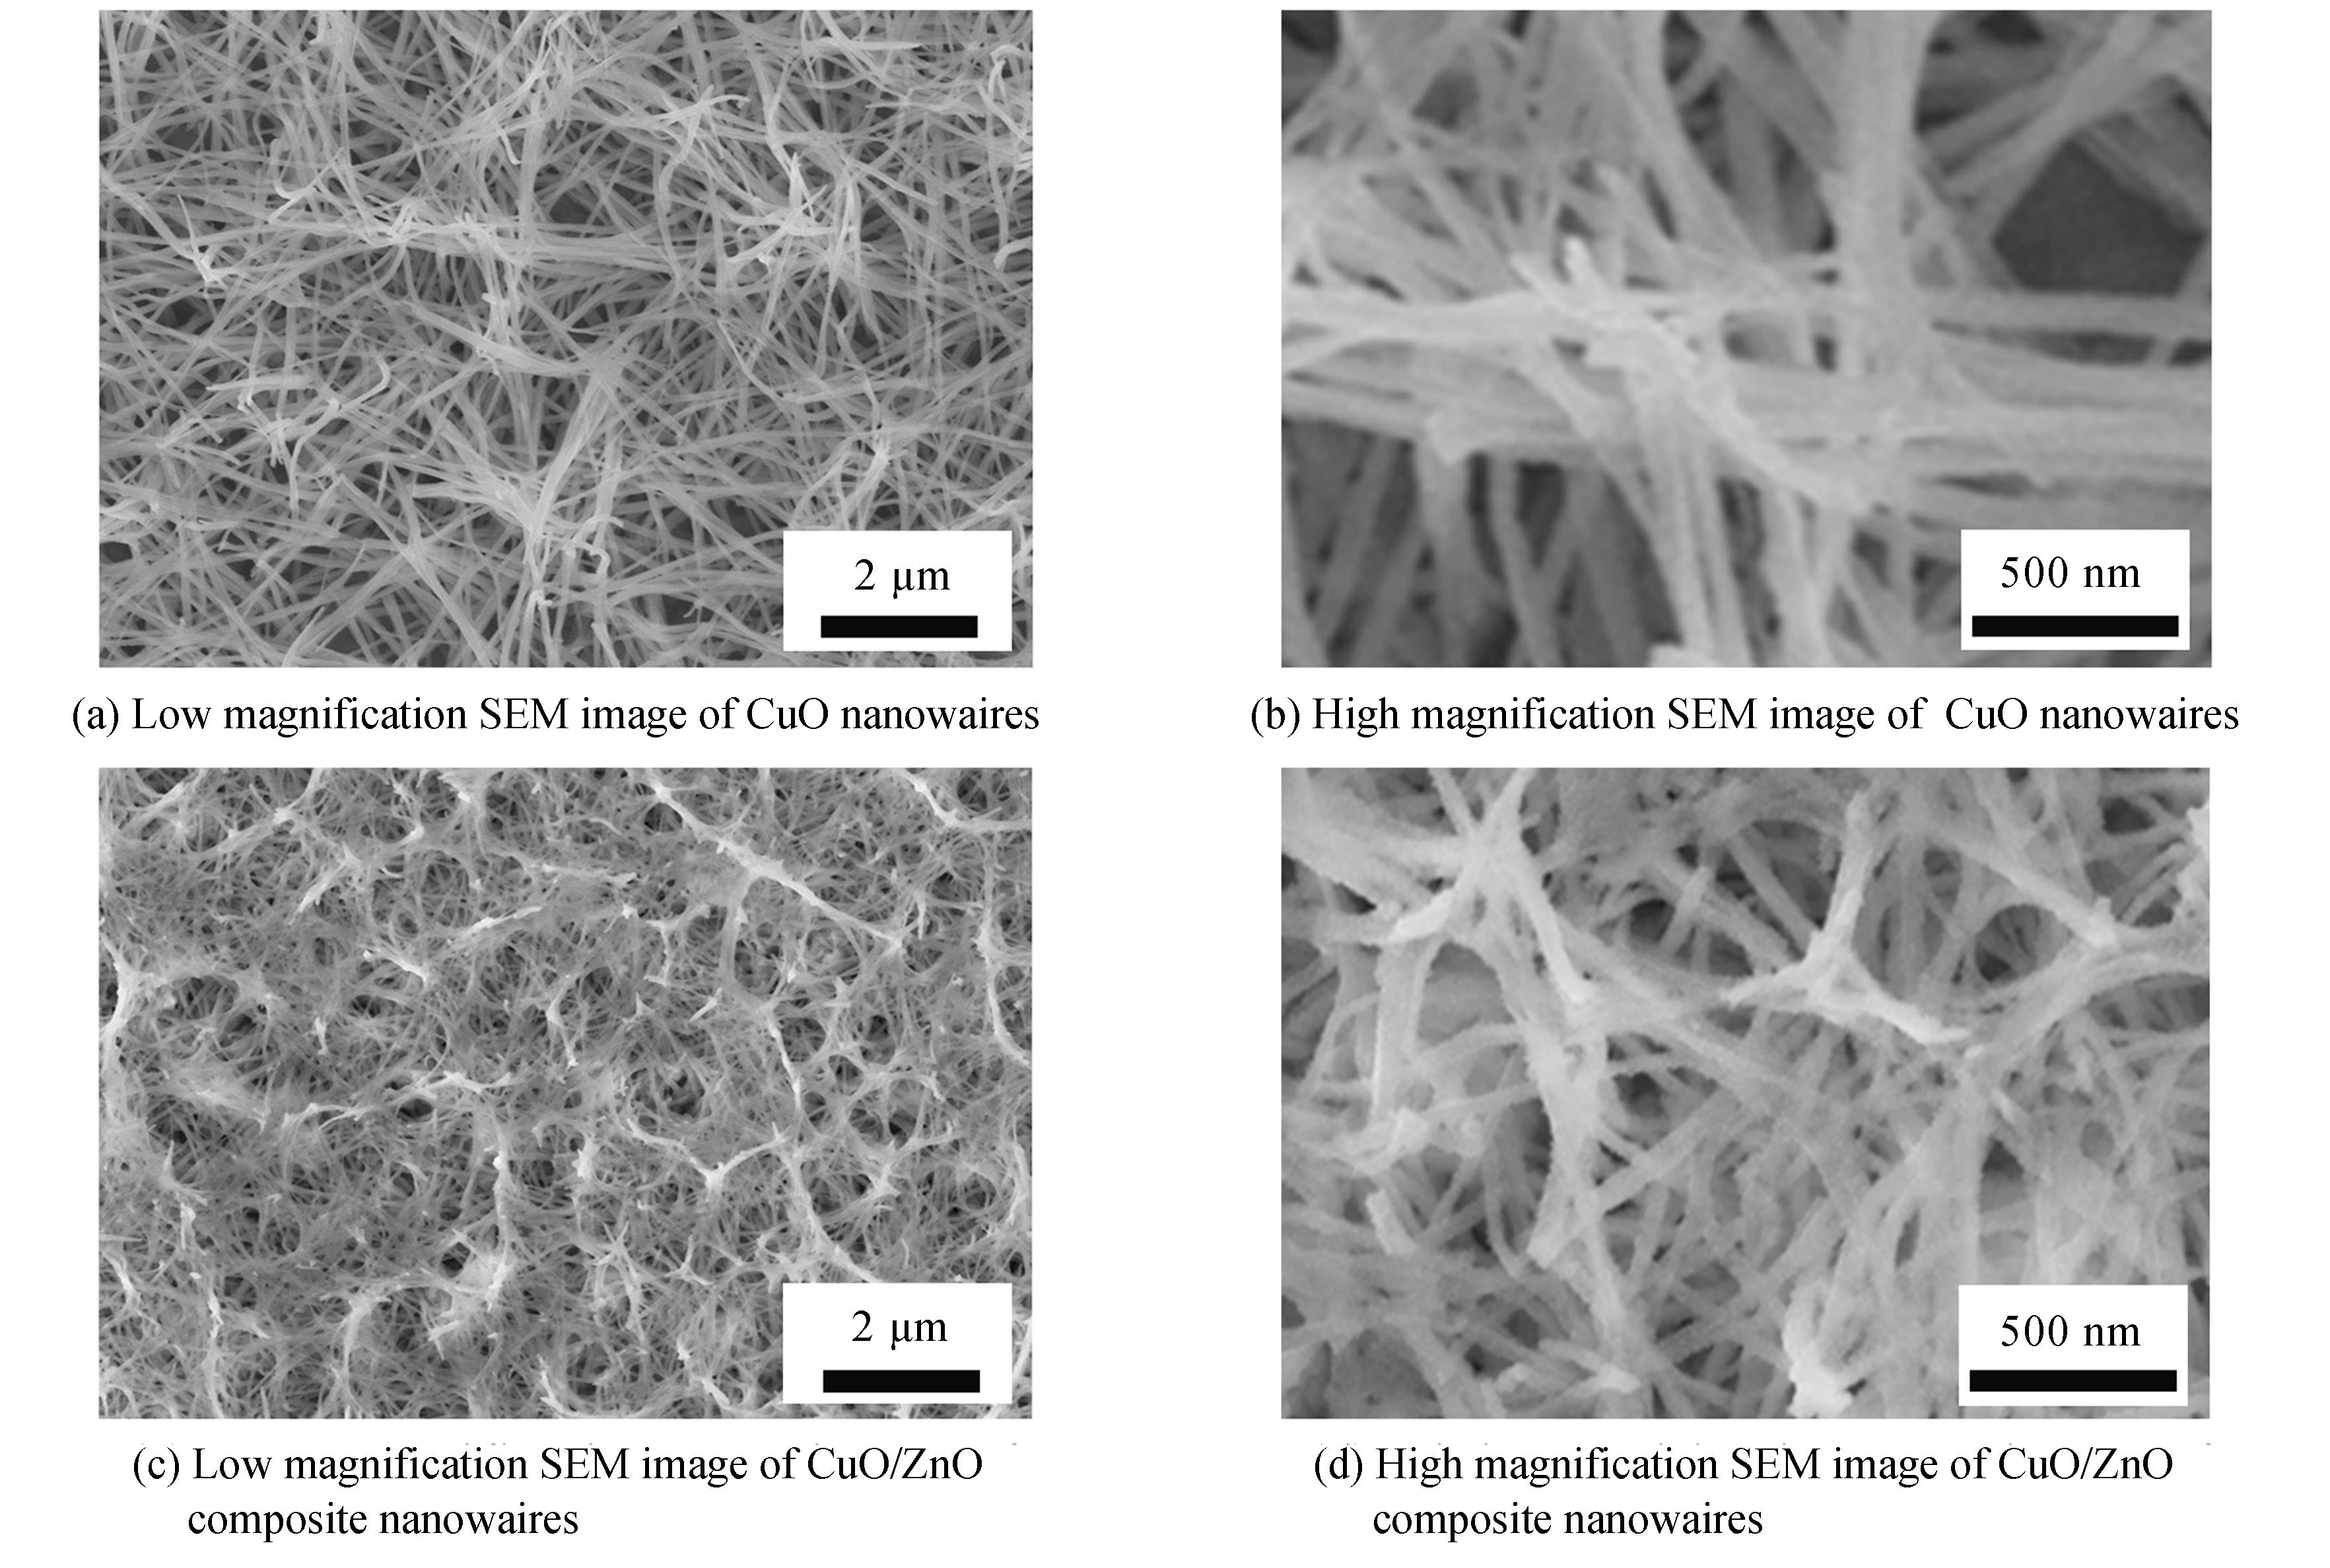 The SEM images of CuO nanowires and CuO/ZnO composite nanowires